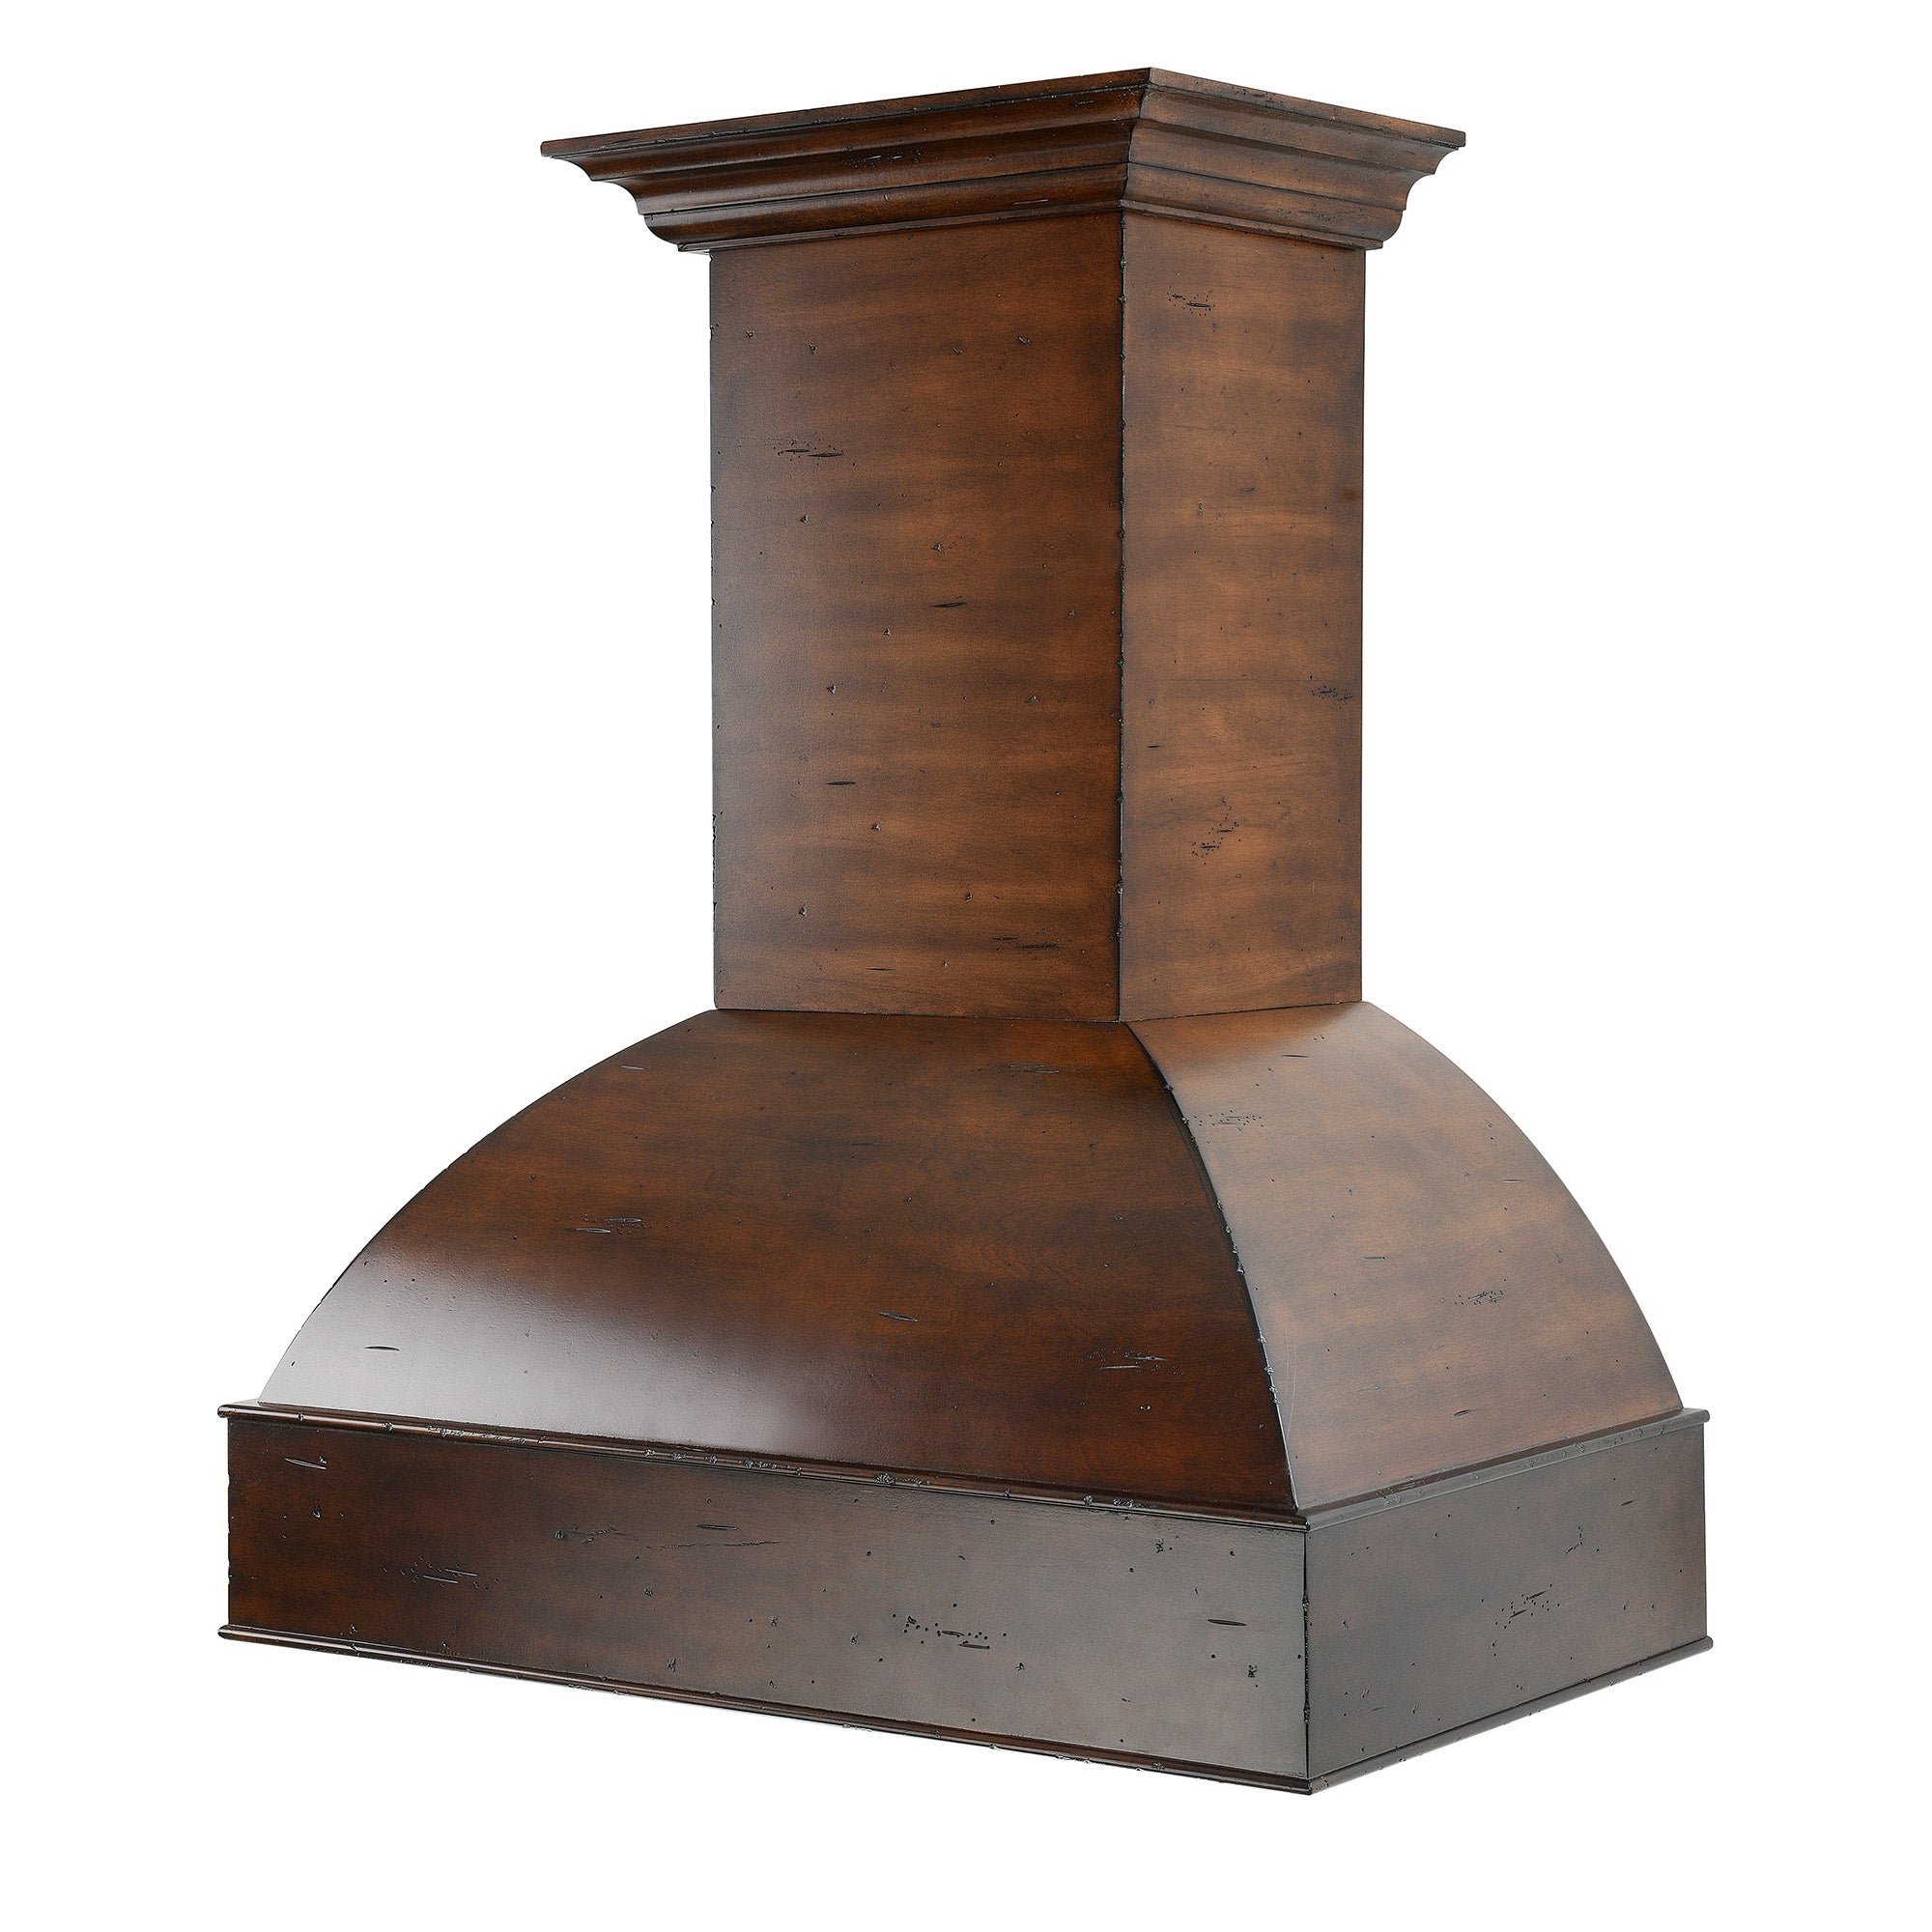 ZLINE 30" Wooden Wall Mount Range Hood in Walnut and Hamilton - Includes  Remote Motor (369WH-RS-30-400)